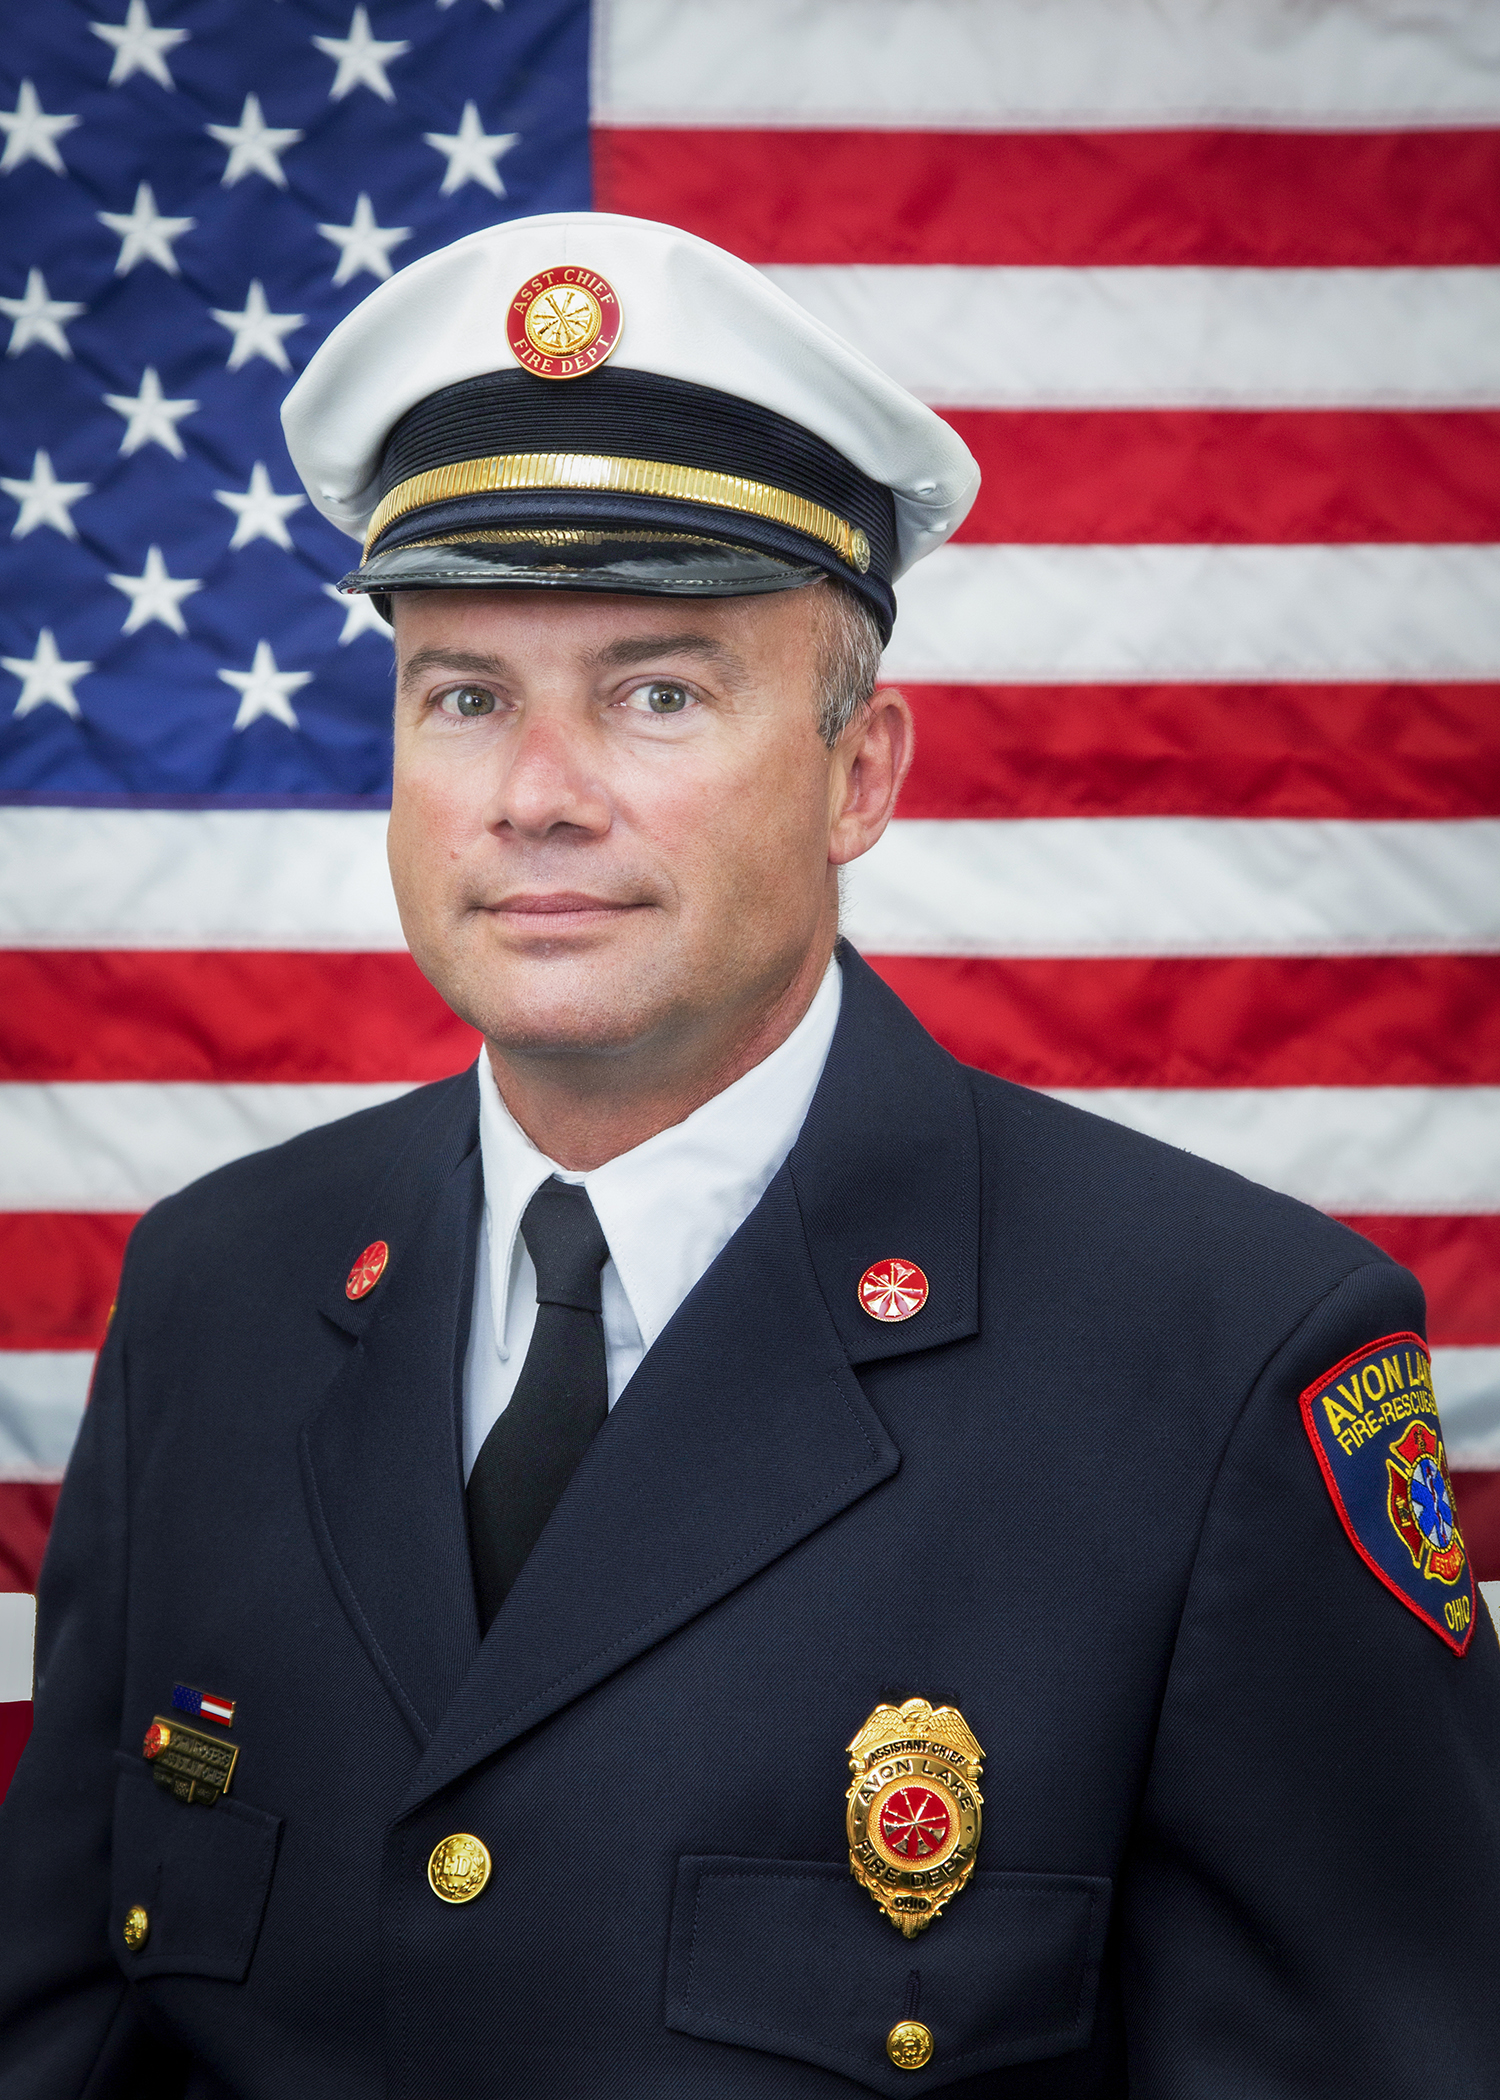 Assistant Chief John Rogers